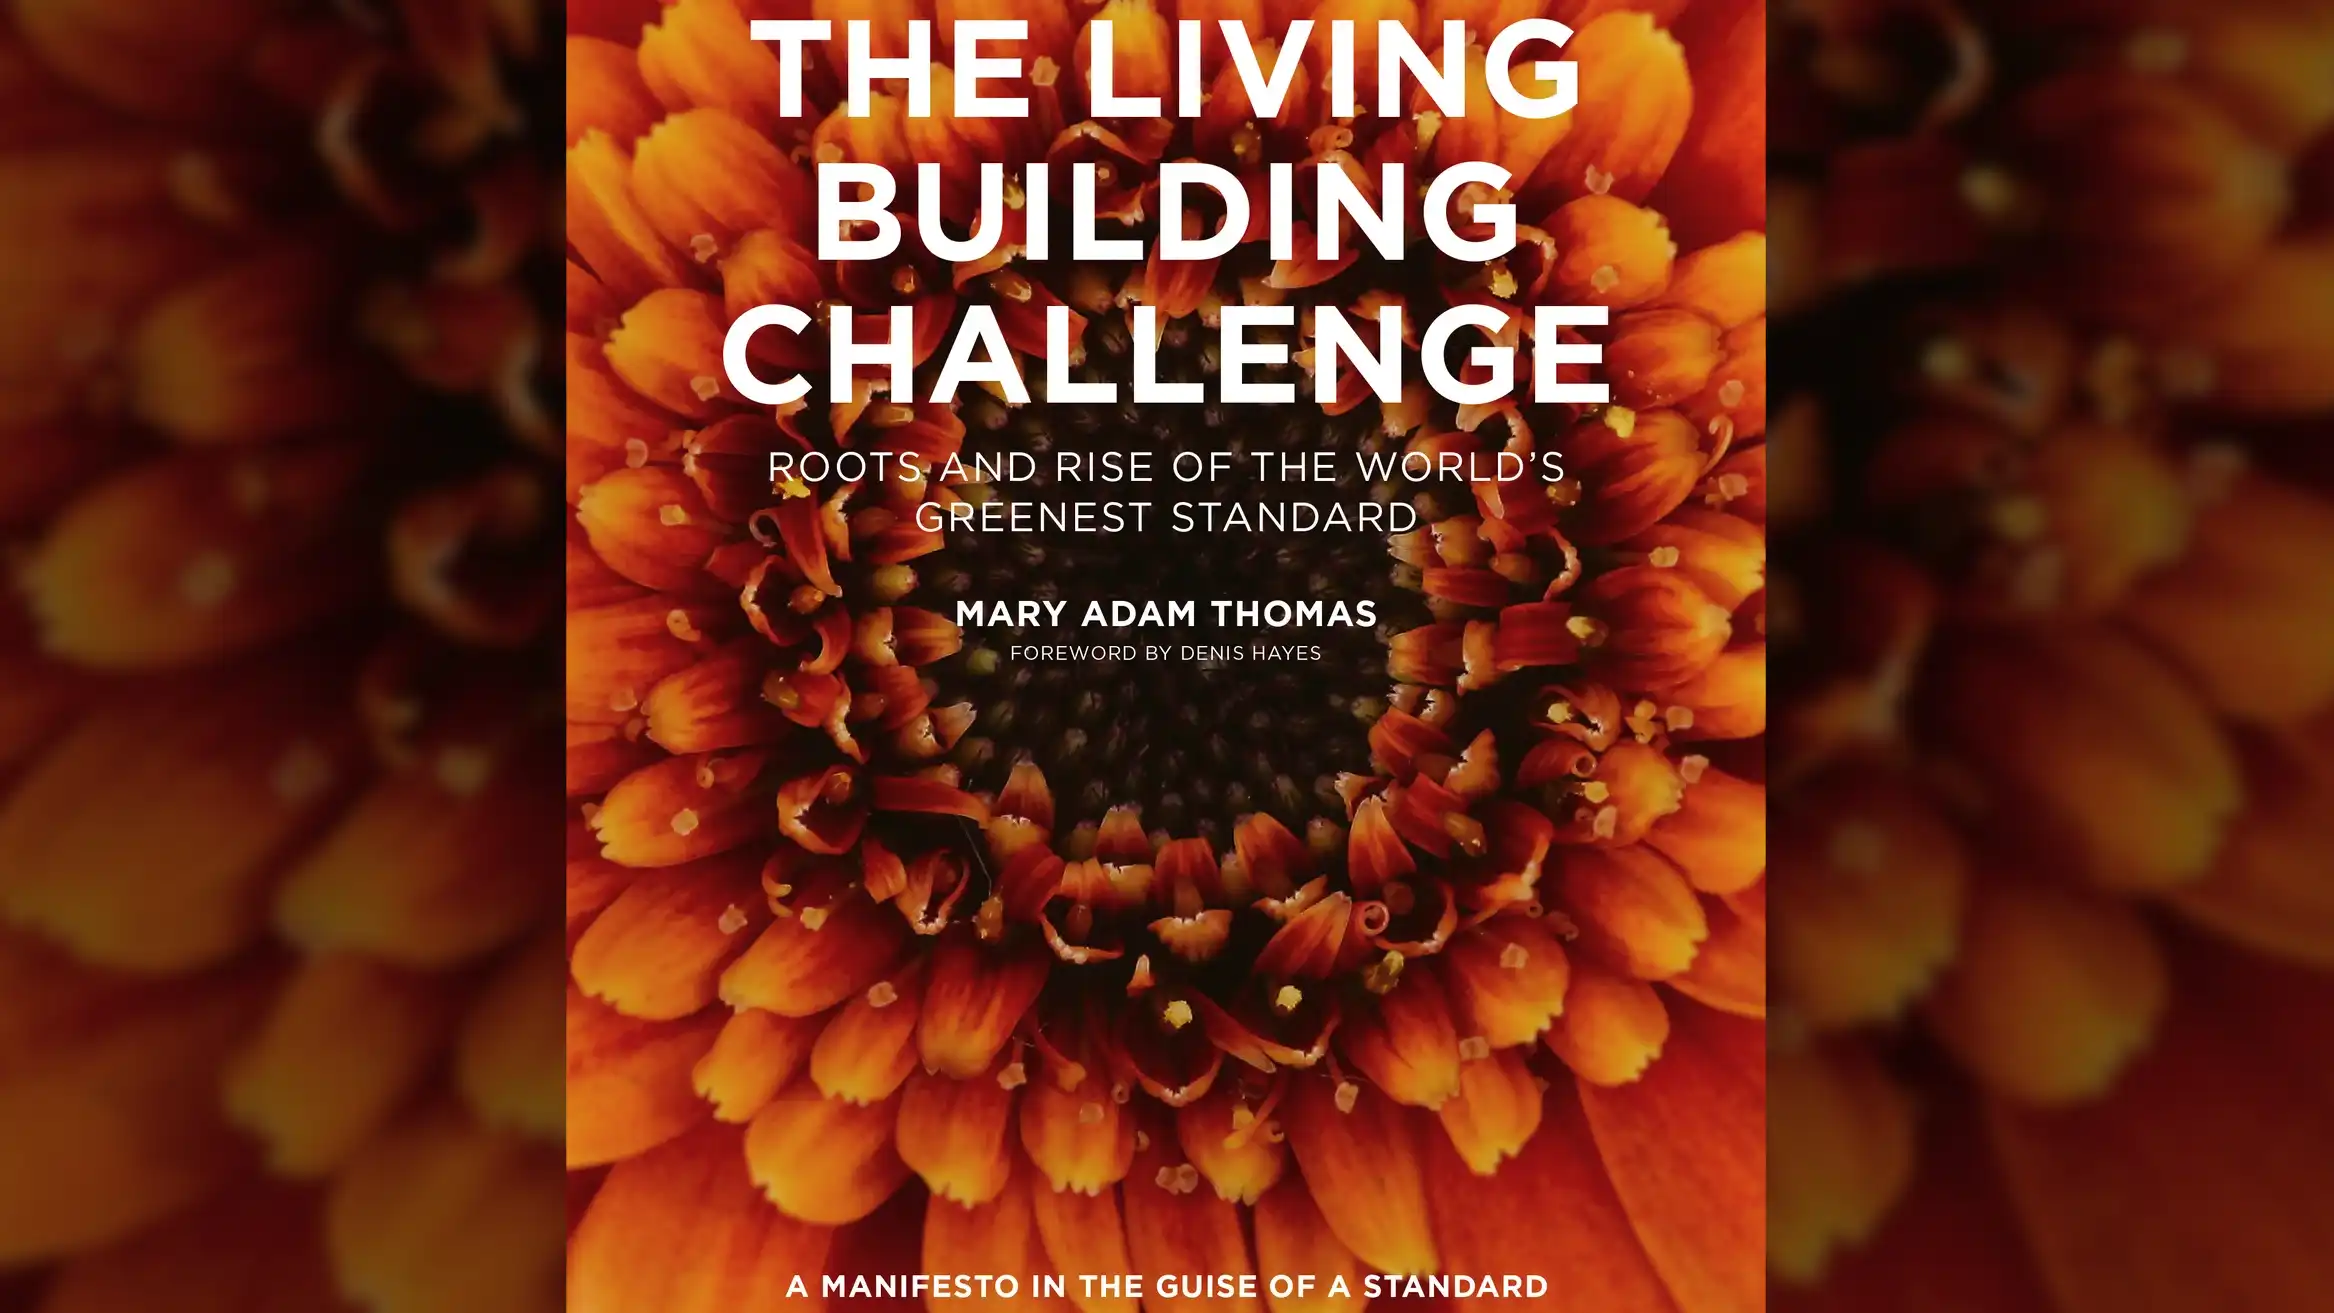 The Living Building Challenge